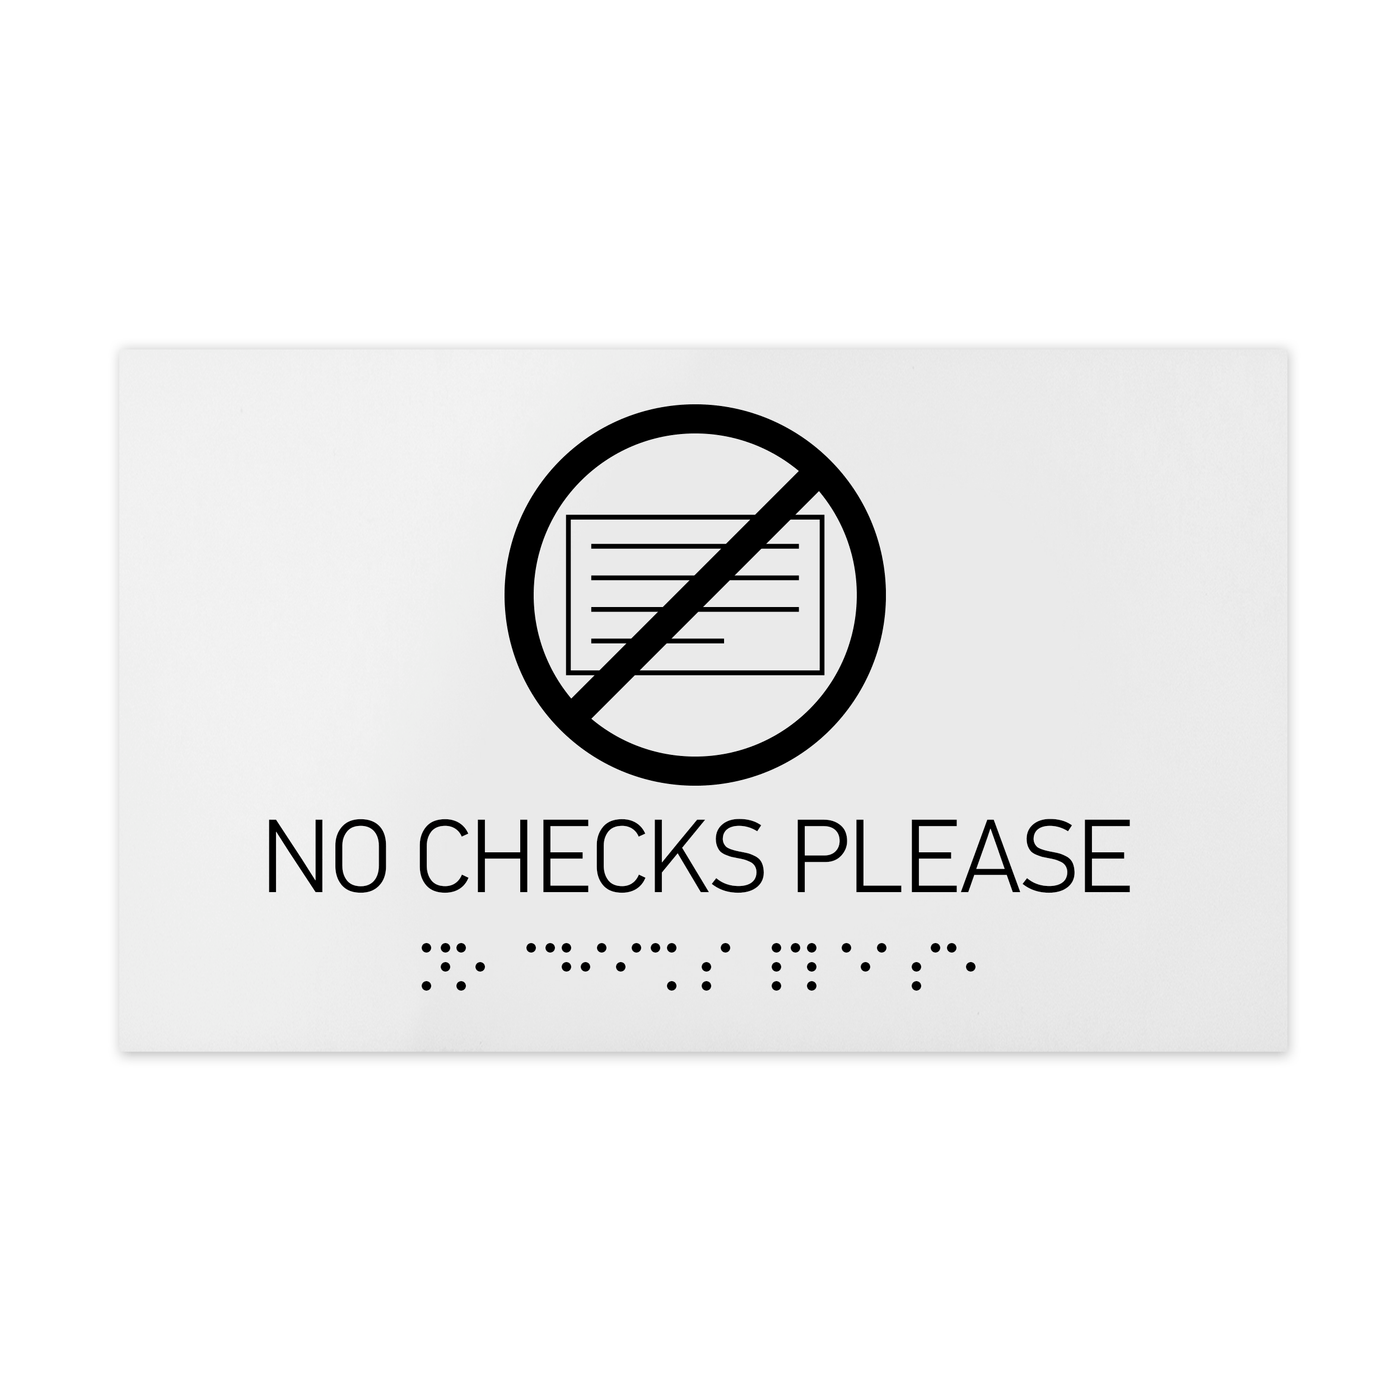 Information Signs - No Checks Please Sign Braille - White Acrylic